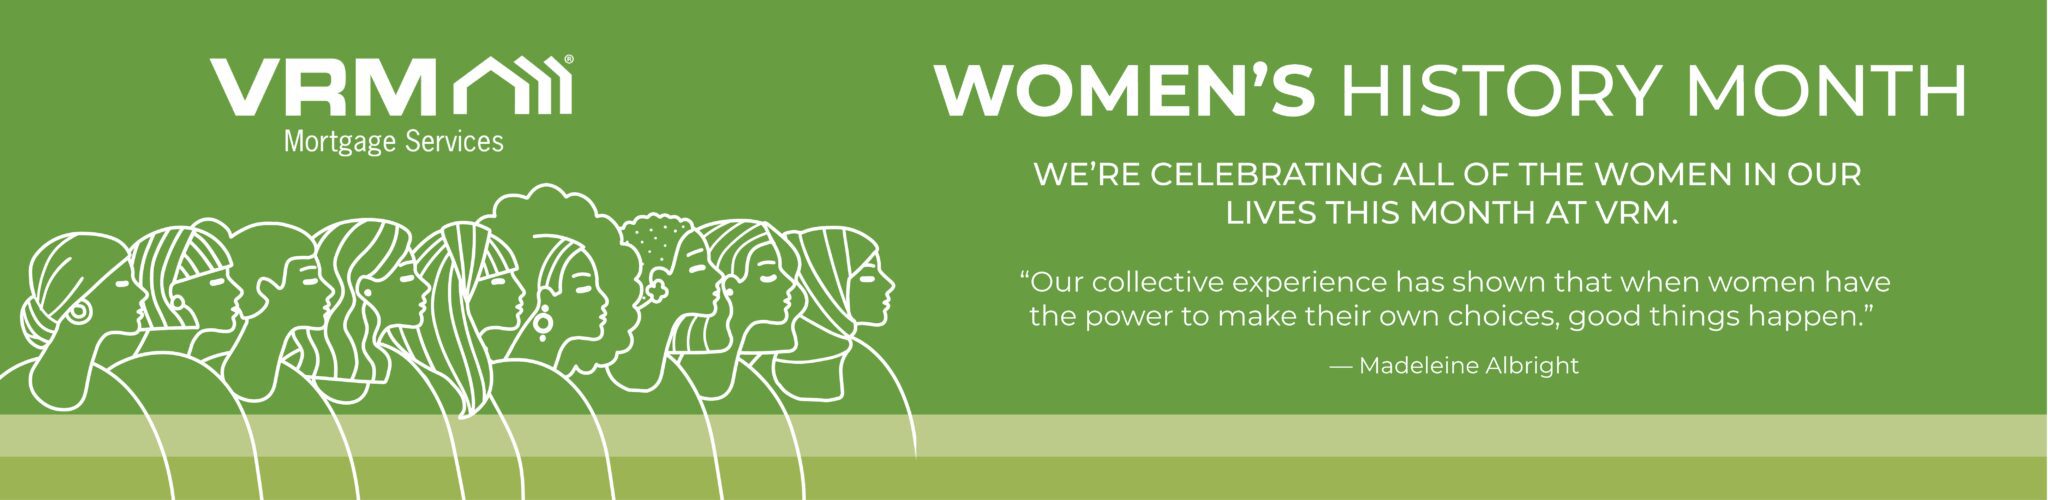 VRM Womens History Month Banner | REO Asset Management | VRM Mortgage Services